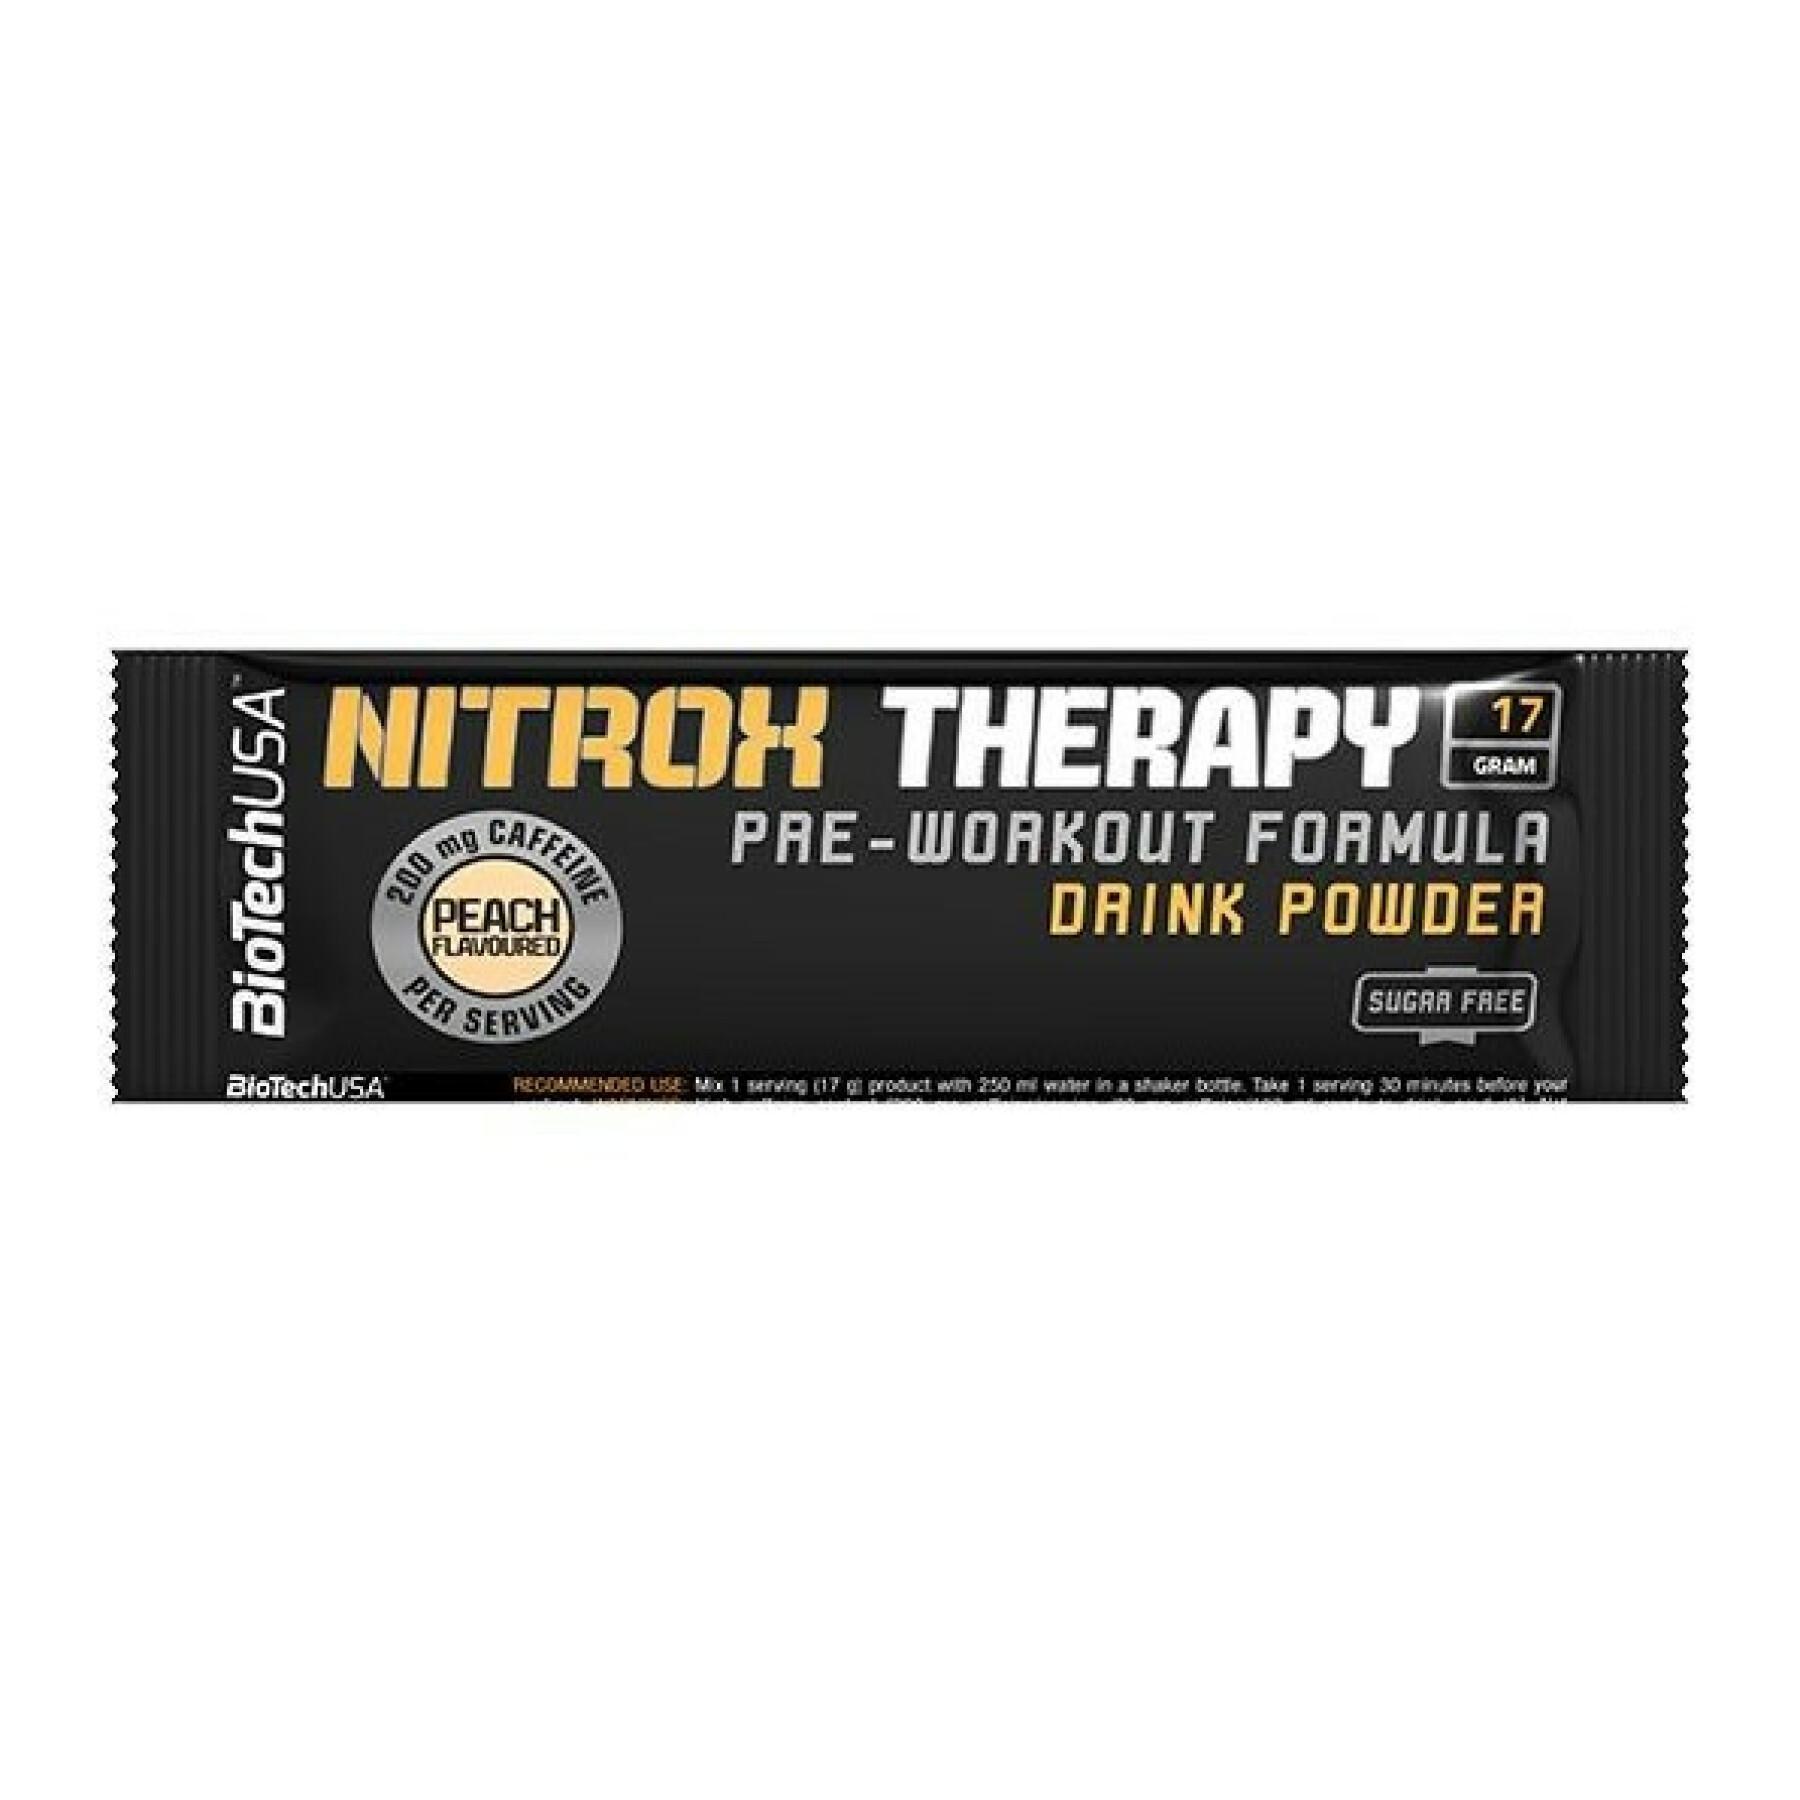 50 packets of booster Biotech USA nitrox therapy - Fruits tropicaux - 17g